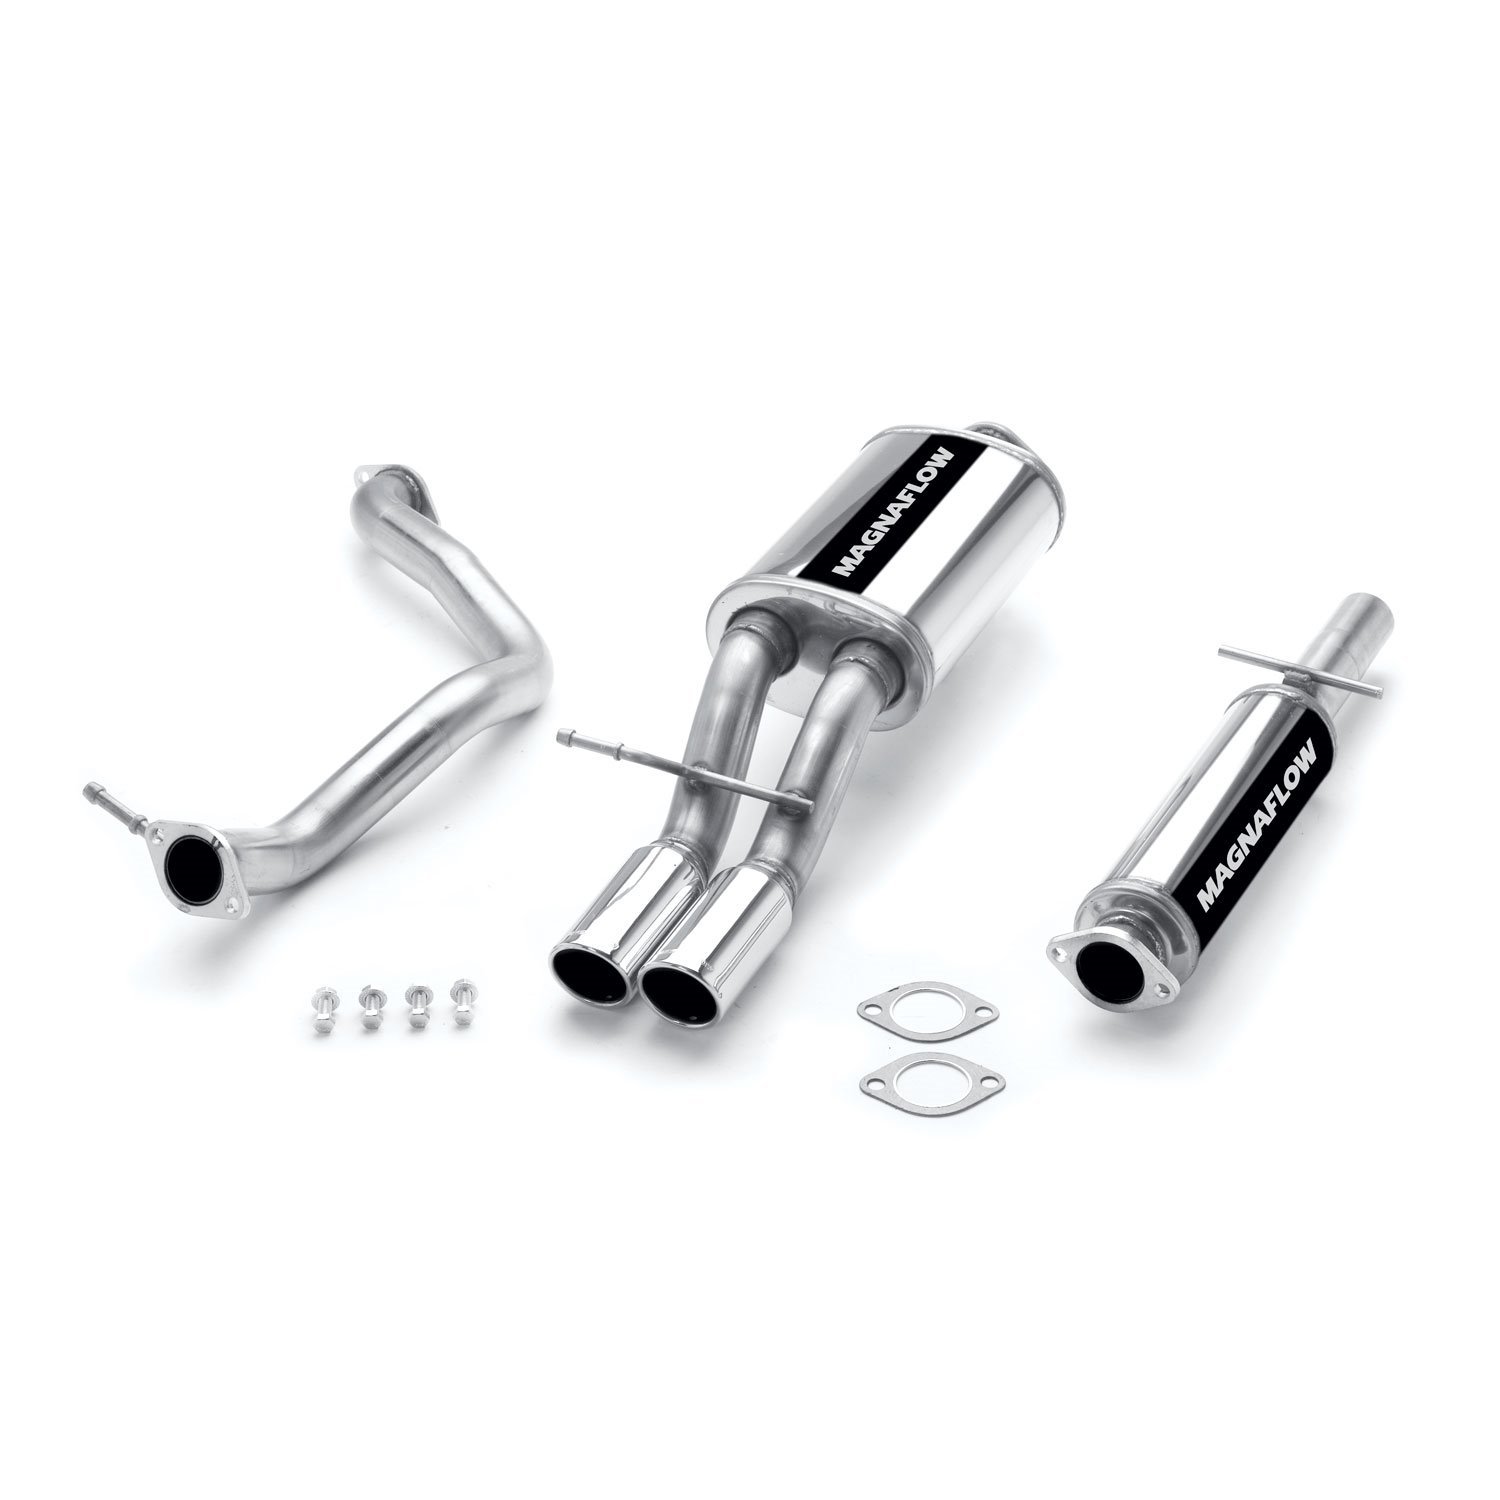 Touring Series Cat-Back Exhaust System 1998-2005 VW Beetle